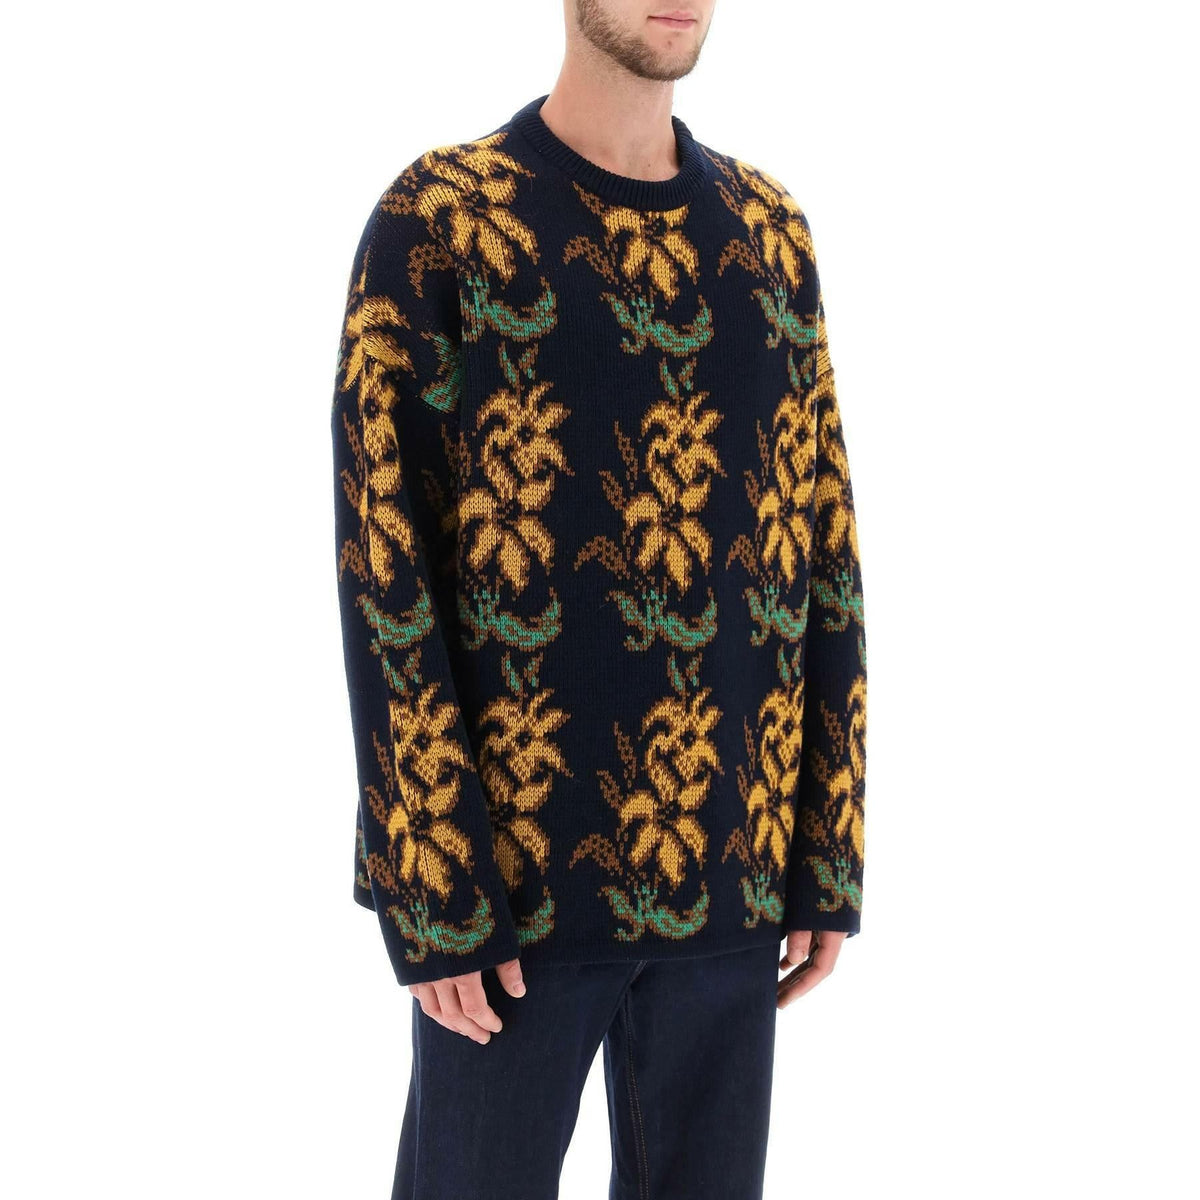 Etro Sweater With Floral Pattern - JOHN JULIA